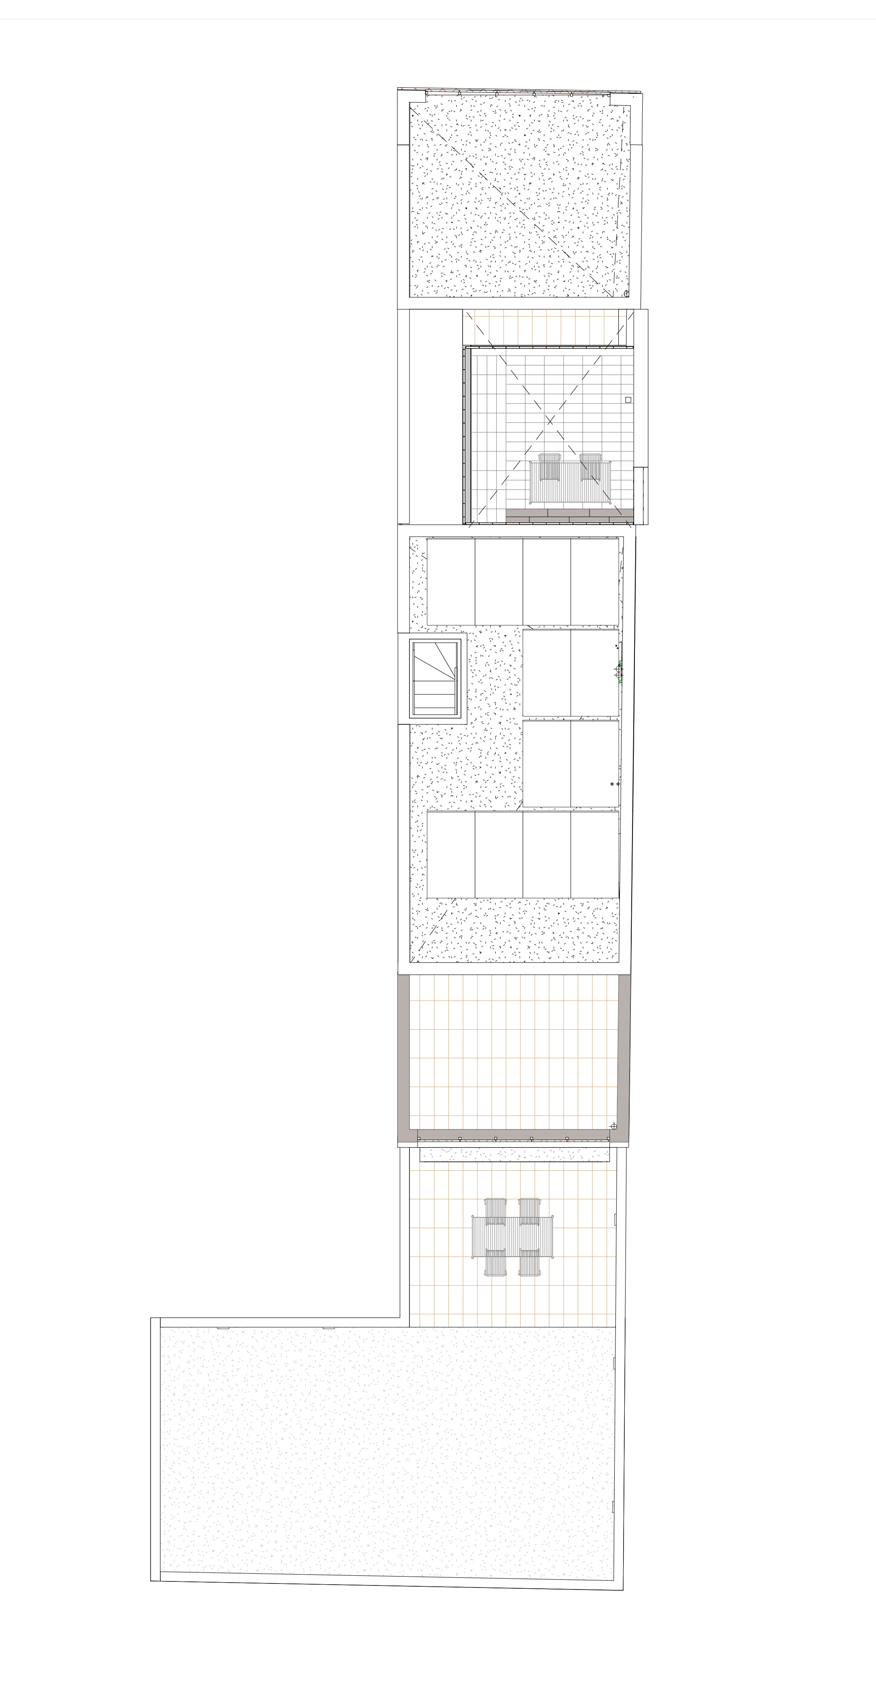 FIVE OH FIVE-THE BAKERY HOUSE-ROOF FLOOR PLAN